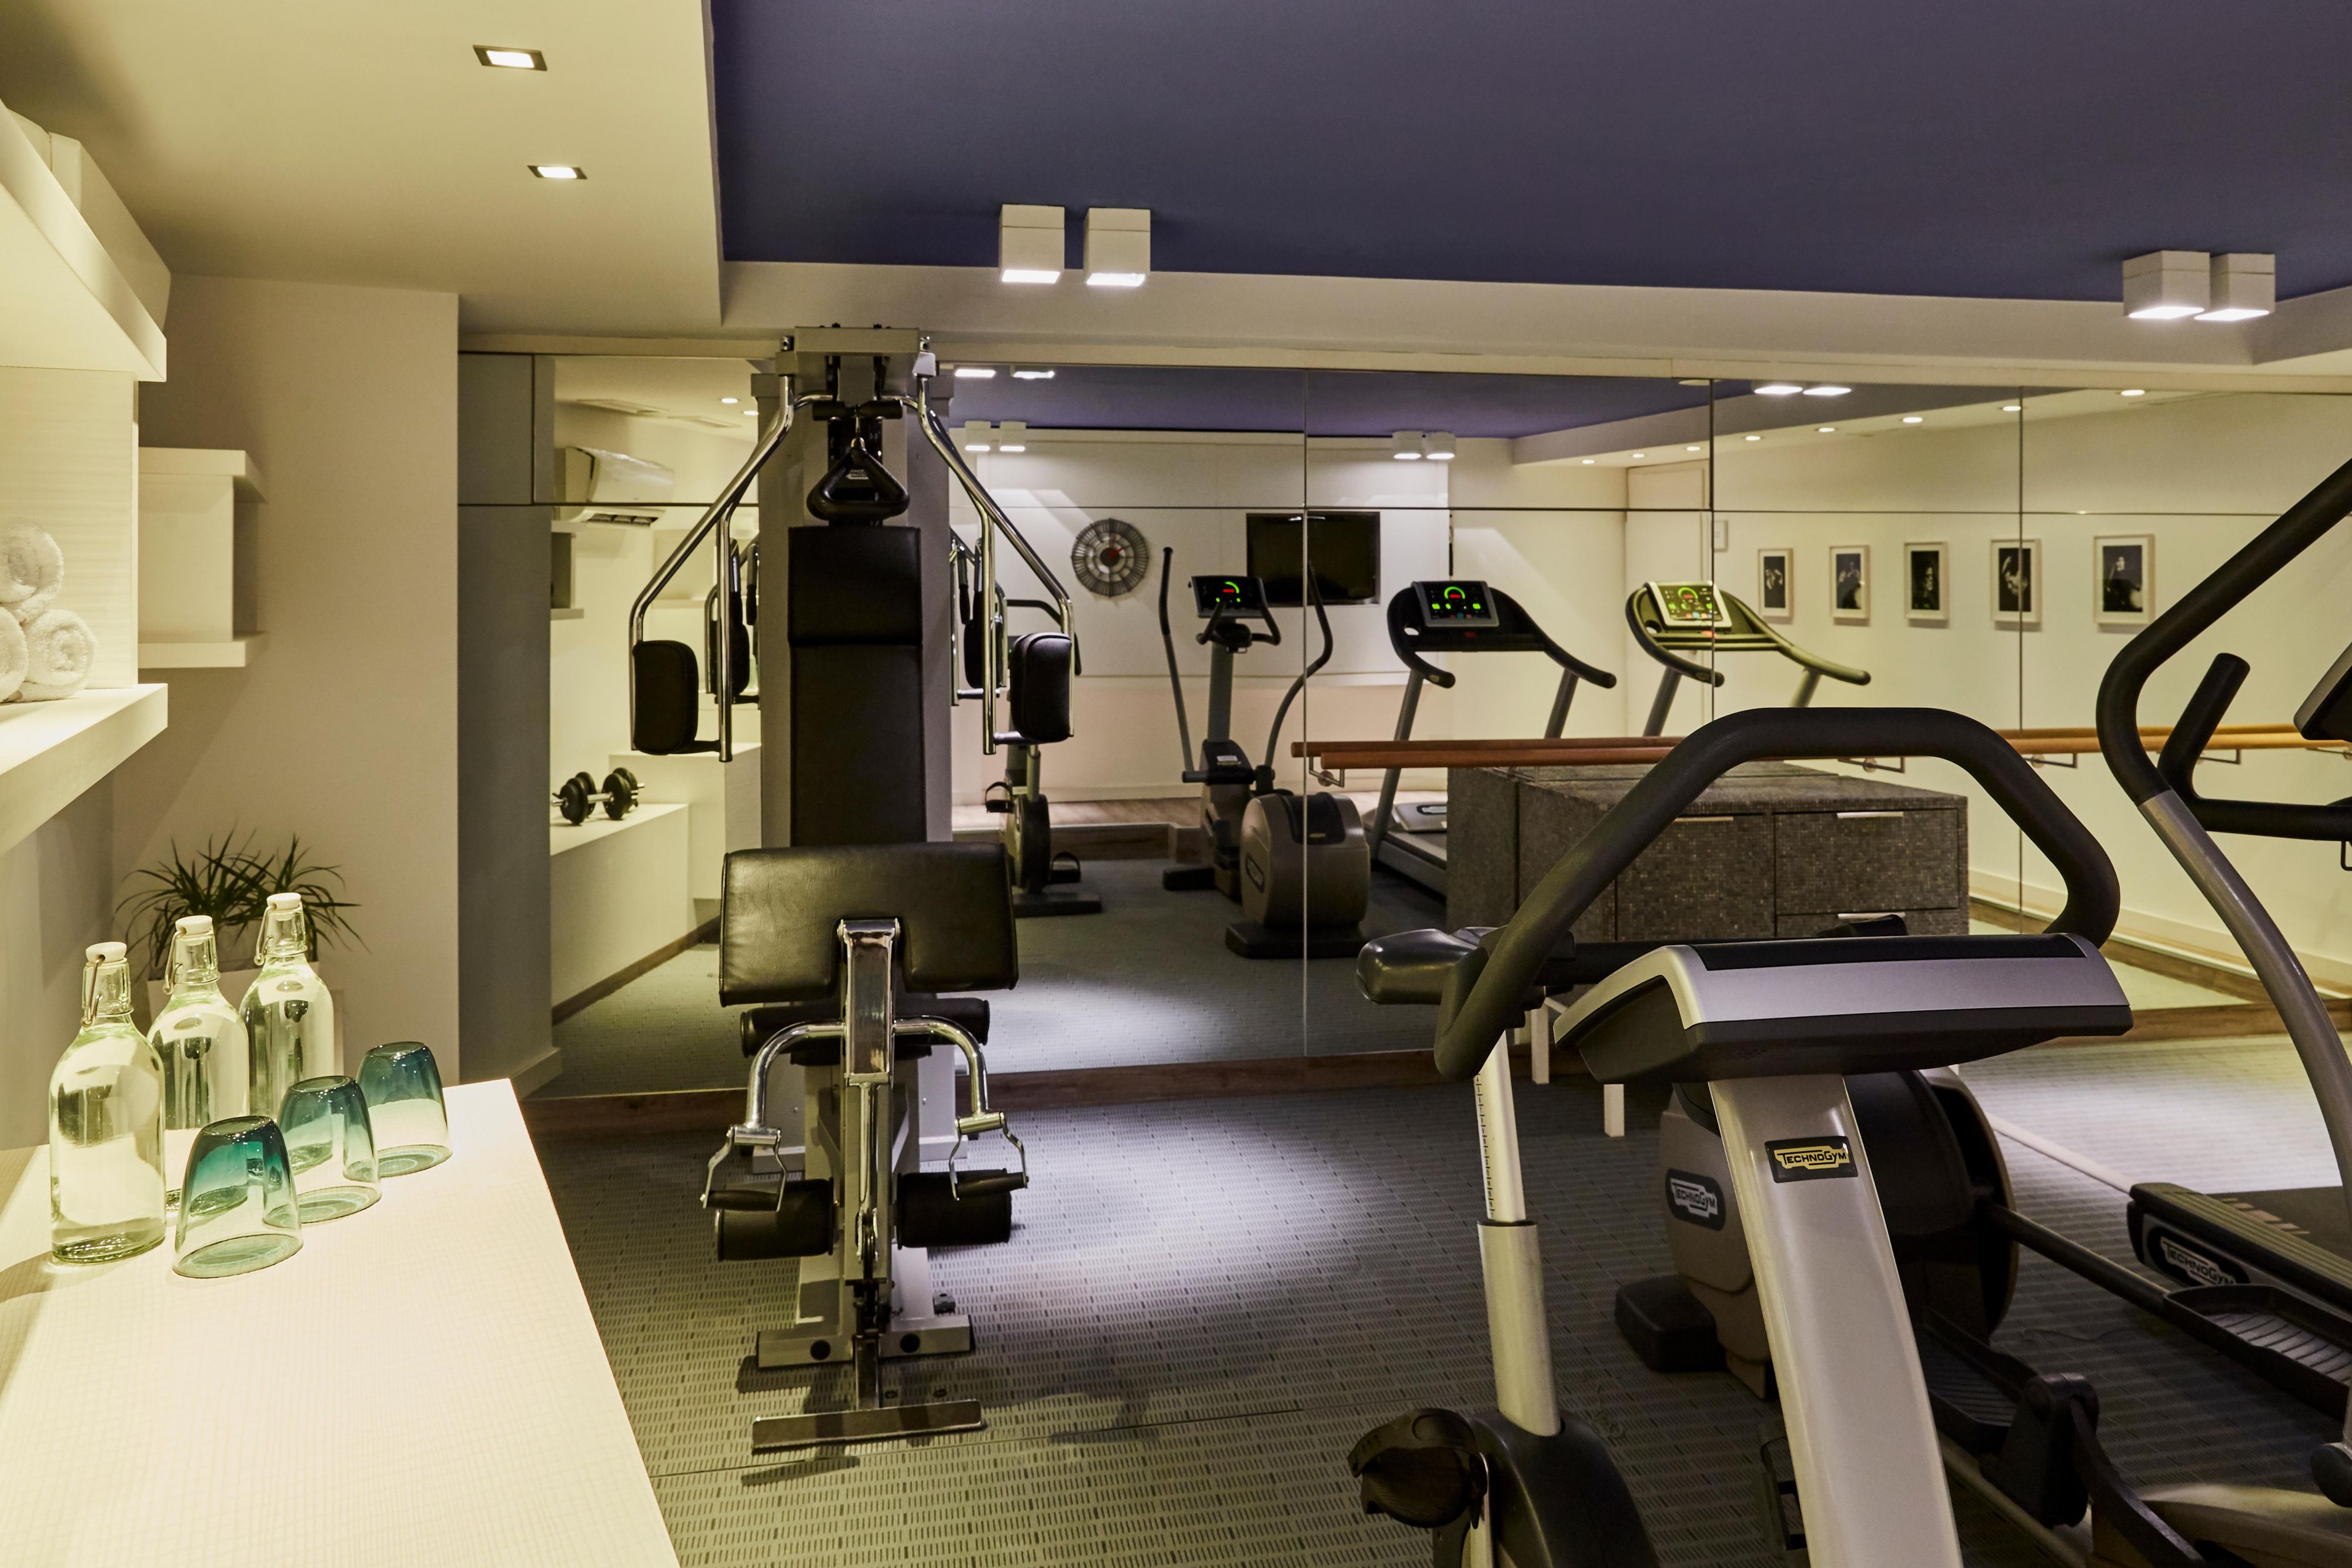 We are delighted to open our fitness area again. 
You can follow your practice routine and enjoy a satisfying workout during your stay with us.
Based on current COVID-19 regulations, you require a negative Corona test (no older than 24 hours) and need to check-in via the Luca app.